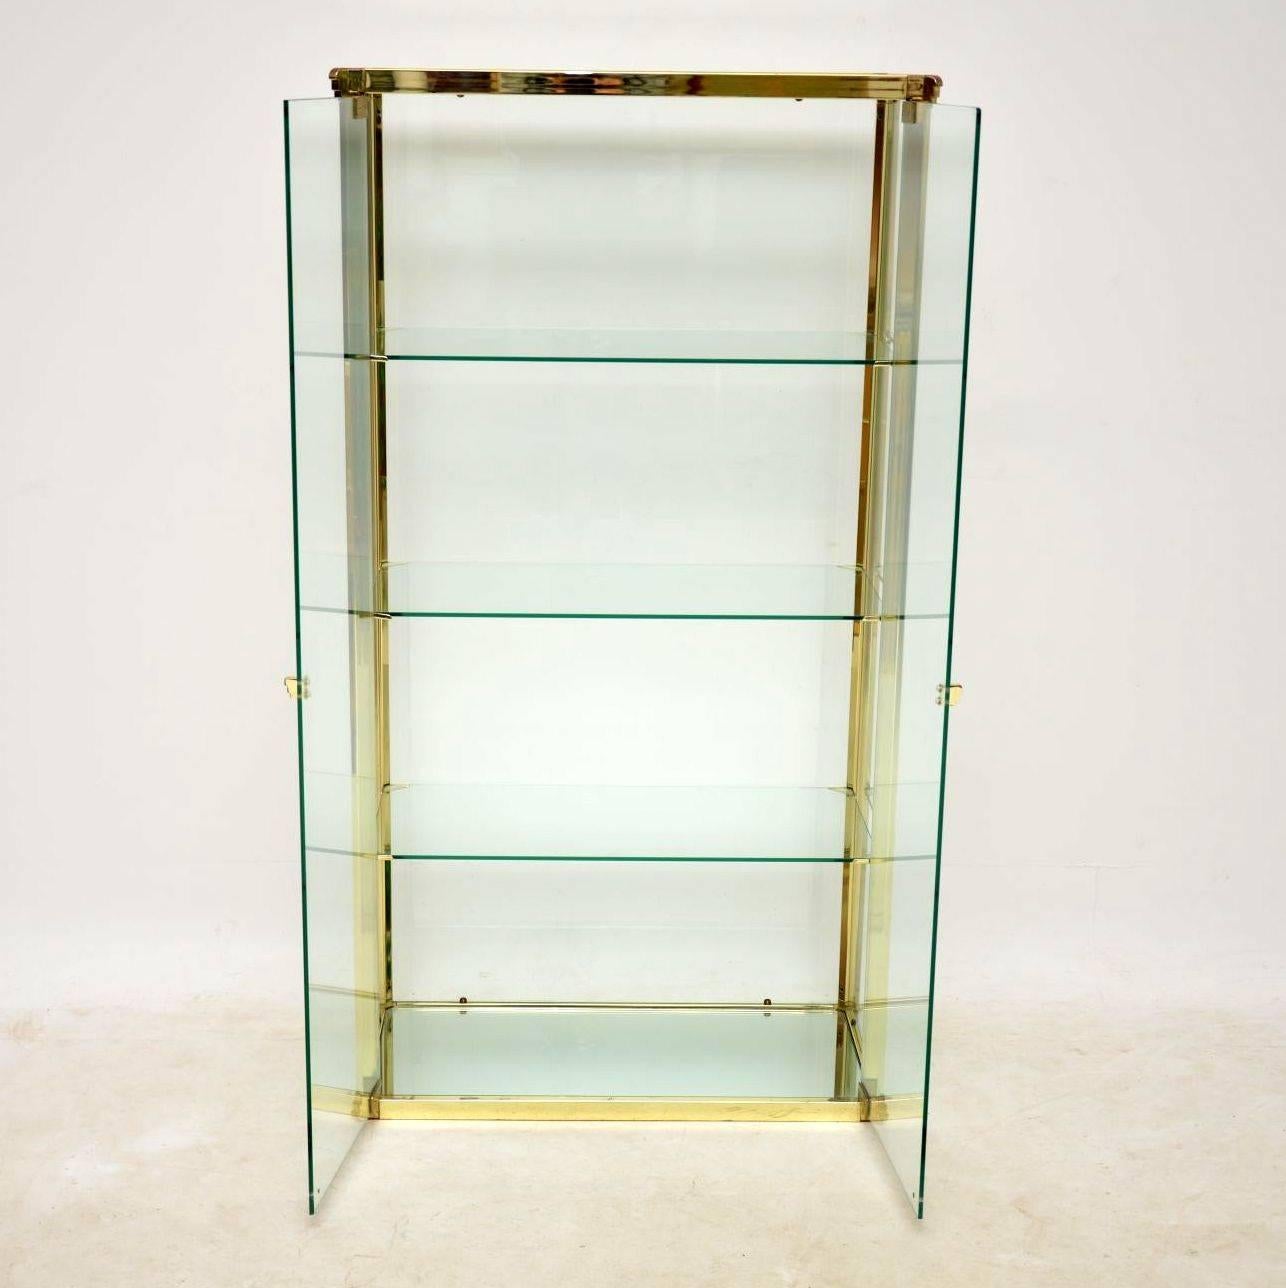 A stunning and very unusual vintage glass display cabinet, this was made in Italy, it dates from the 1970s. It has a brass frame, brass handles and brass shelf supports, with a clear glass carcass and shelves, the bottom shelf is mirrored glass. The